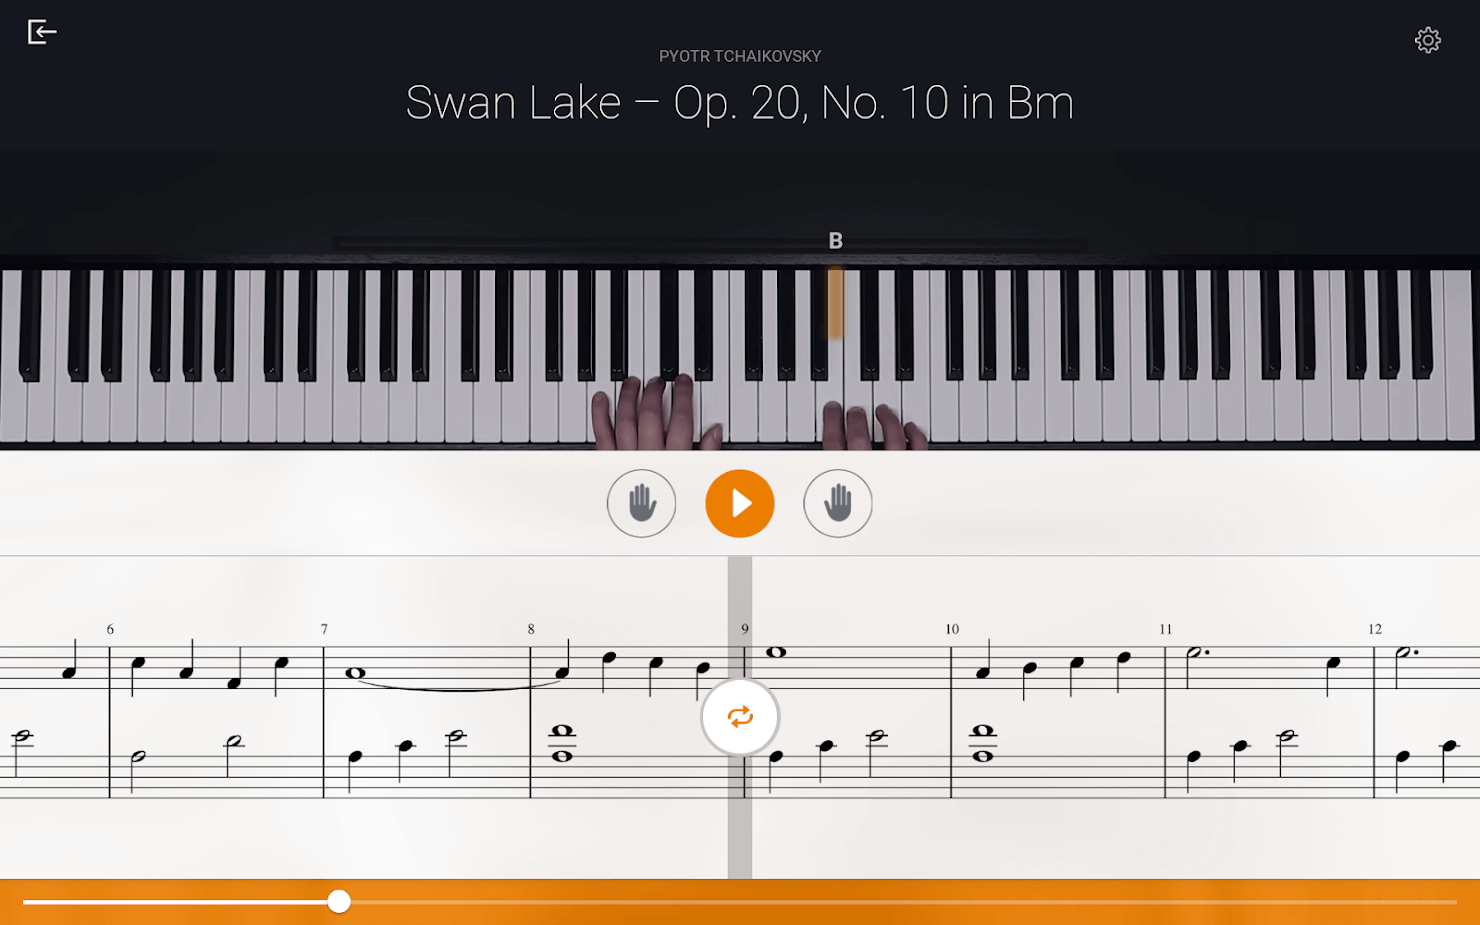 Flowkey piano tutorial app now available on Android ...